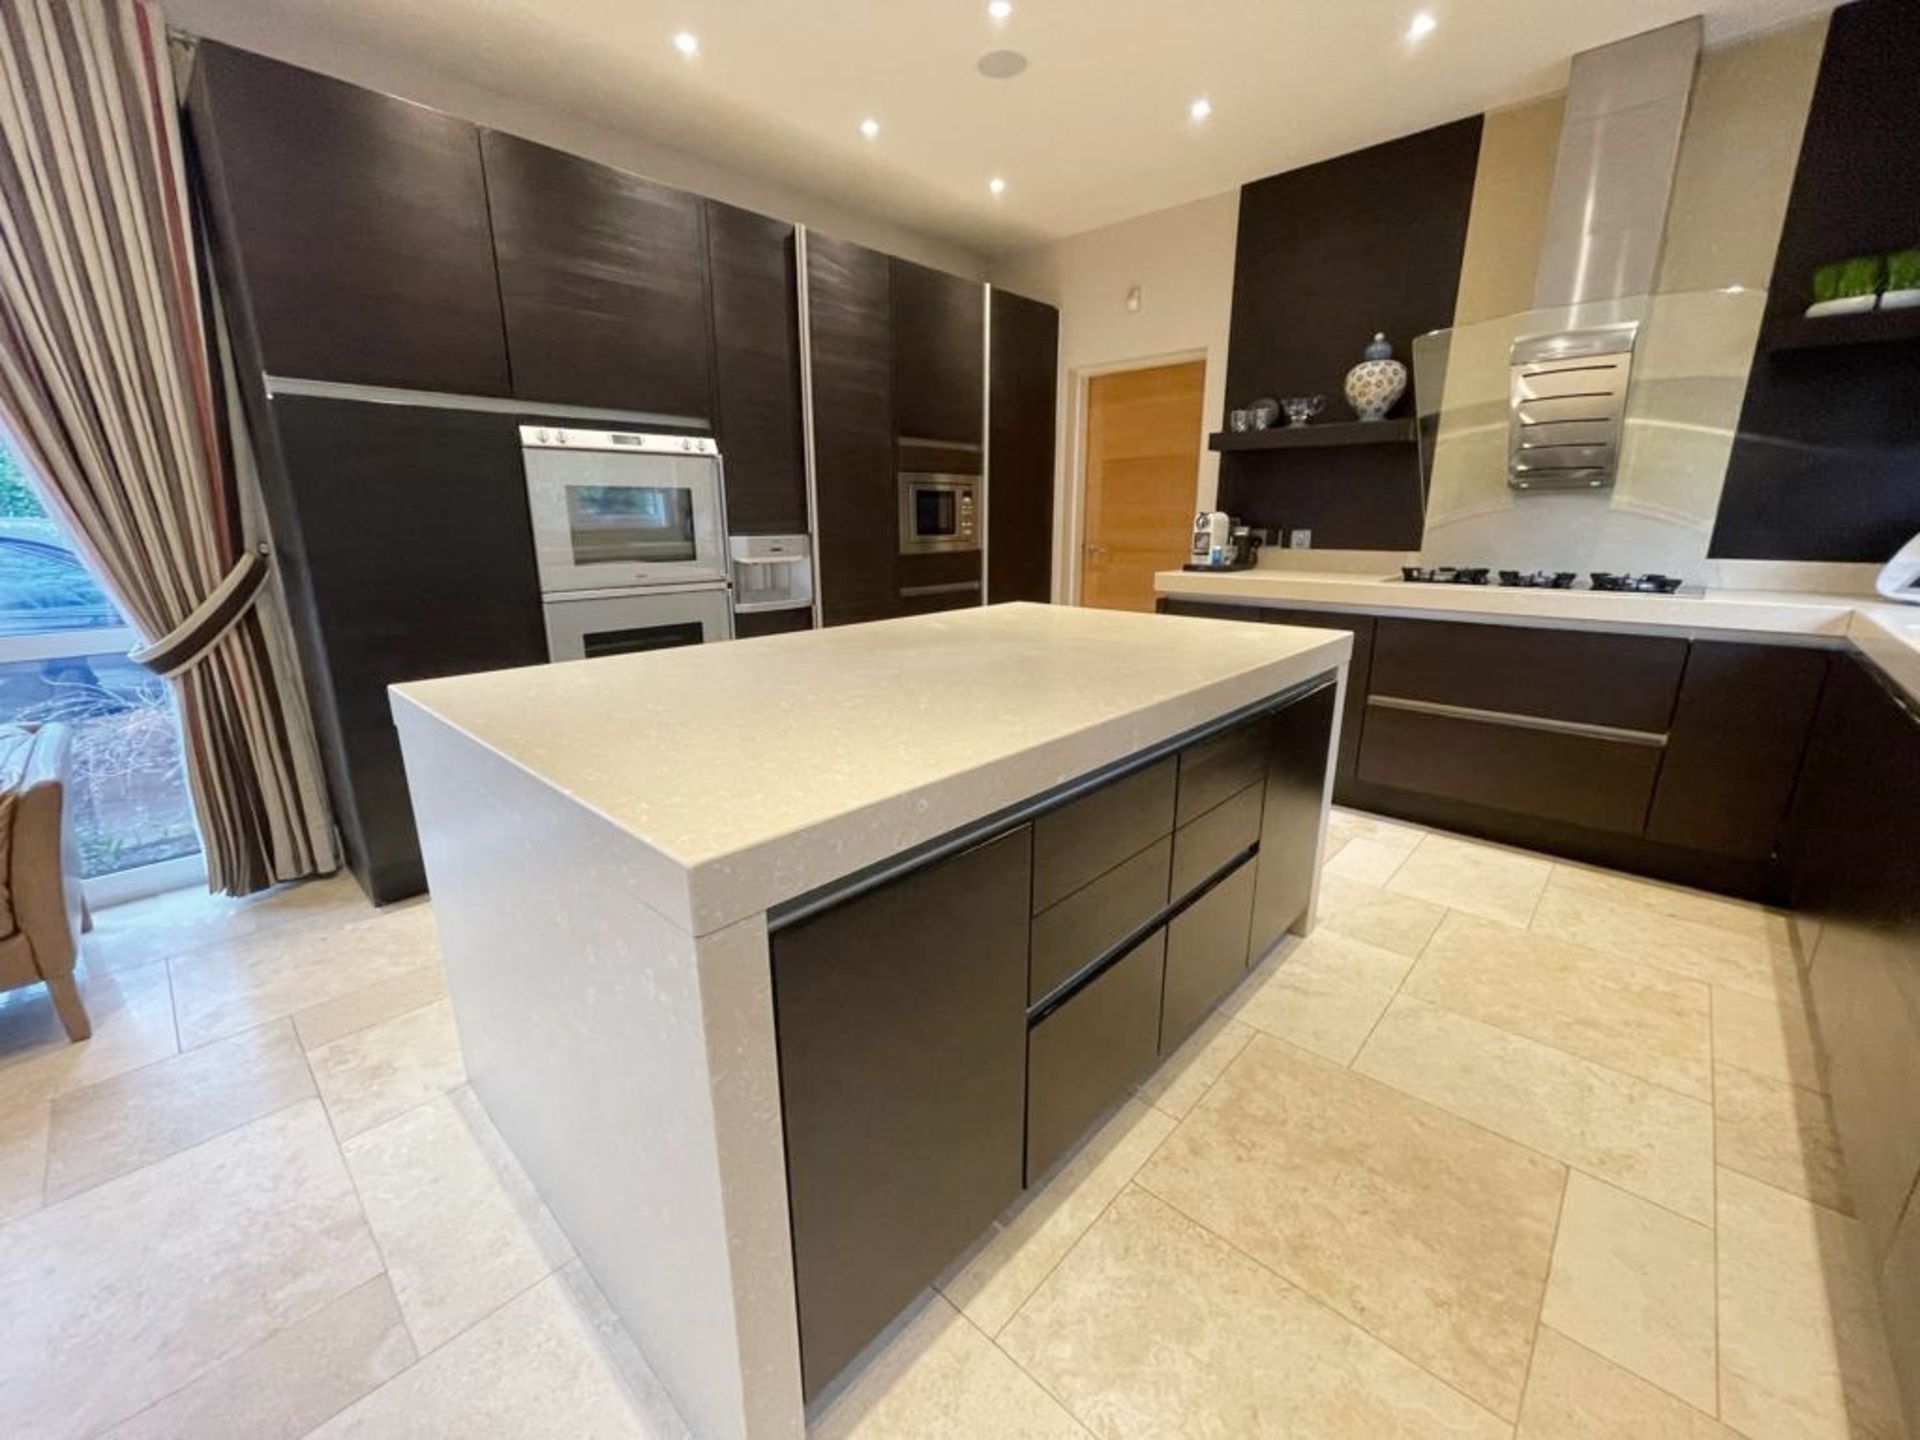 1 x Bespoke SIEMATIC Fitted Kitchen With Gaggenau Appliances, Silstone Worktops, Central Island - Image 33 of 83